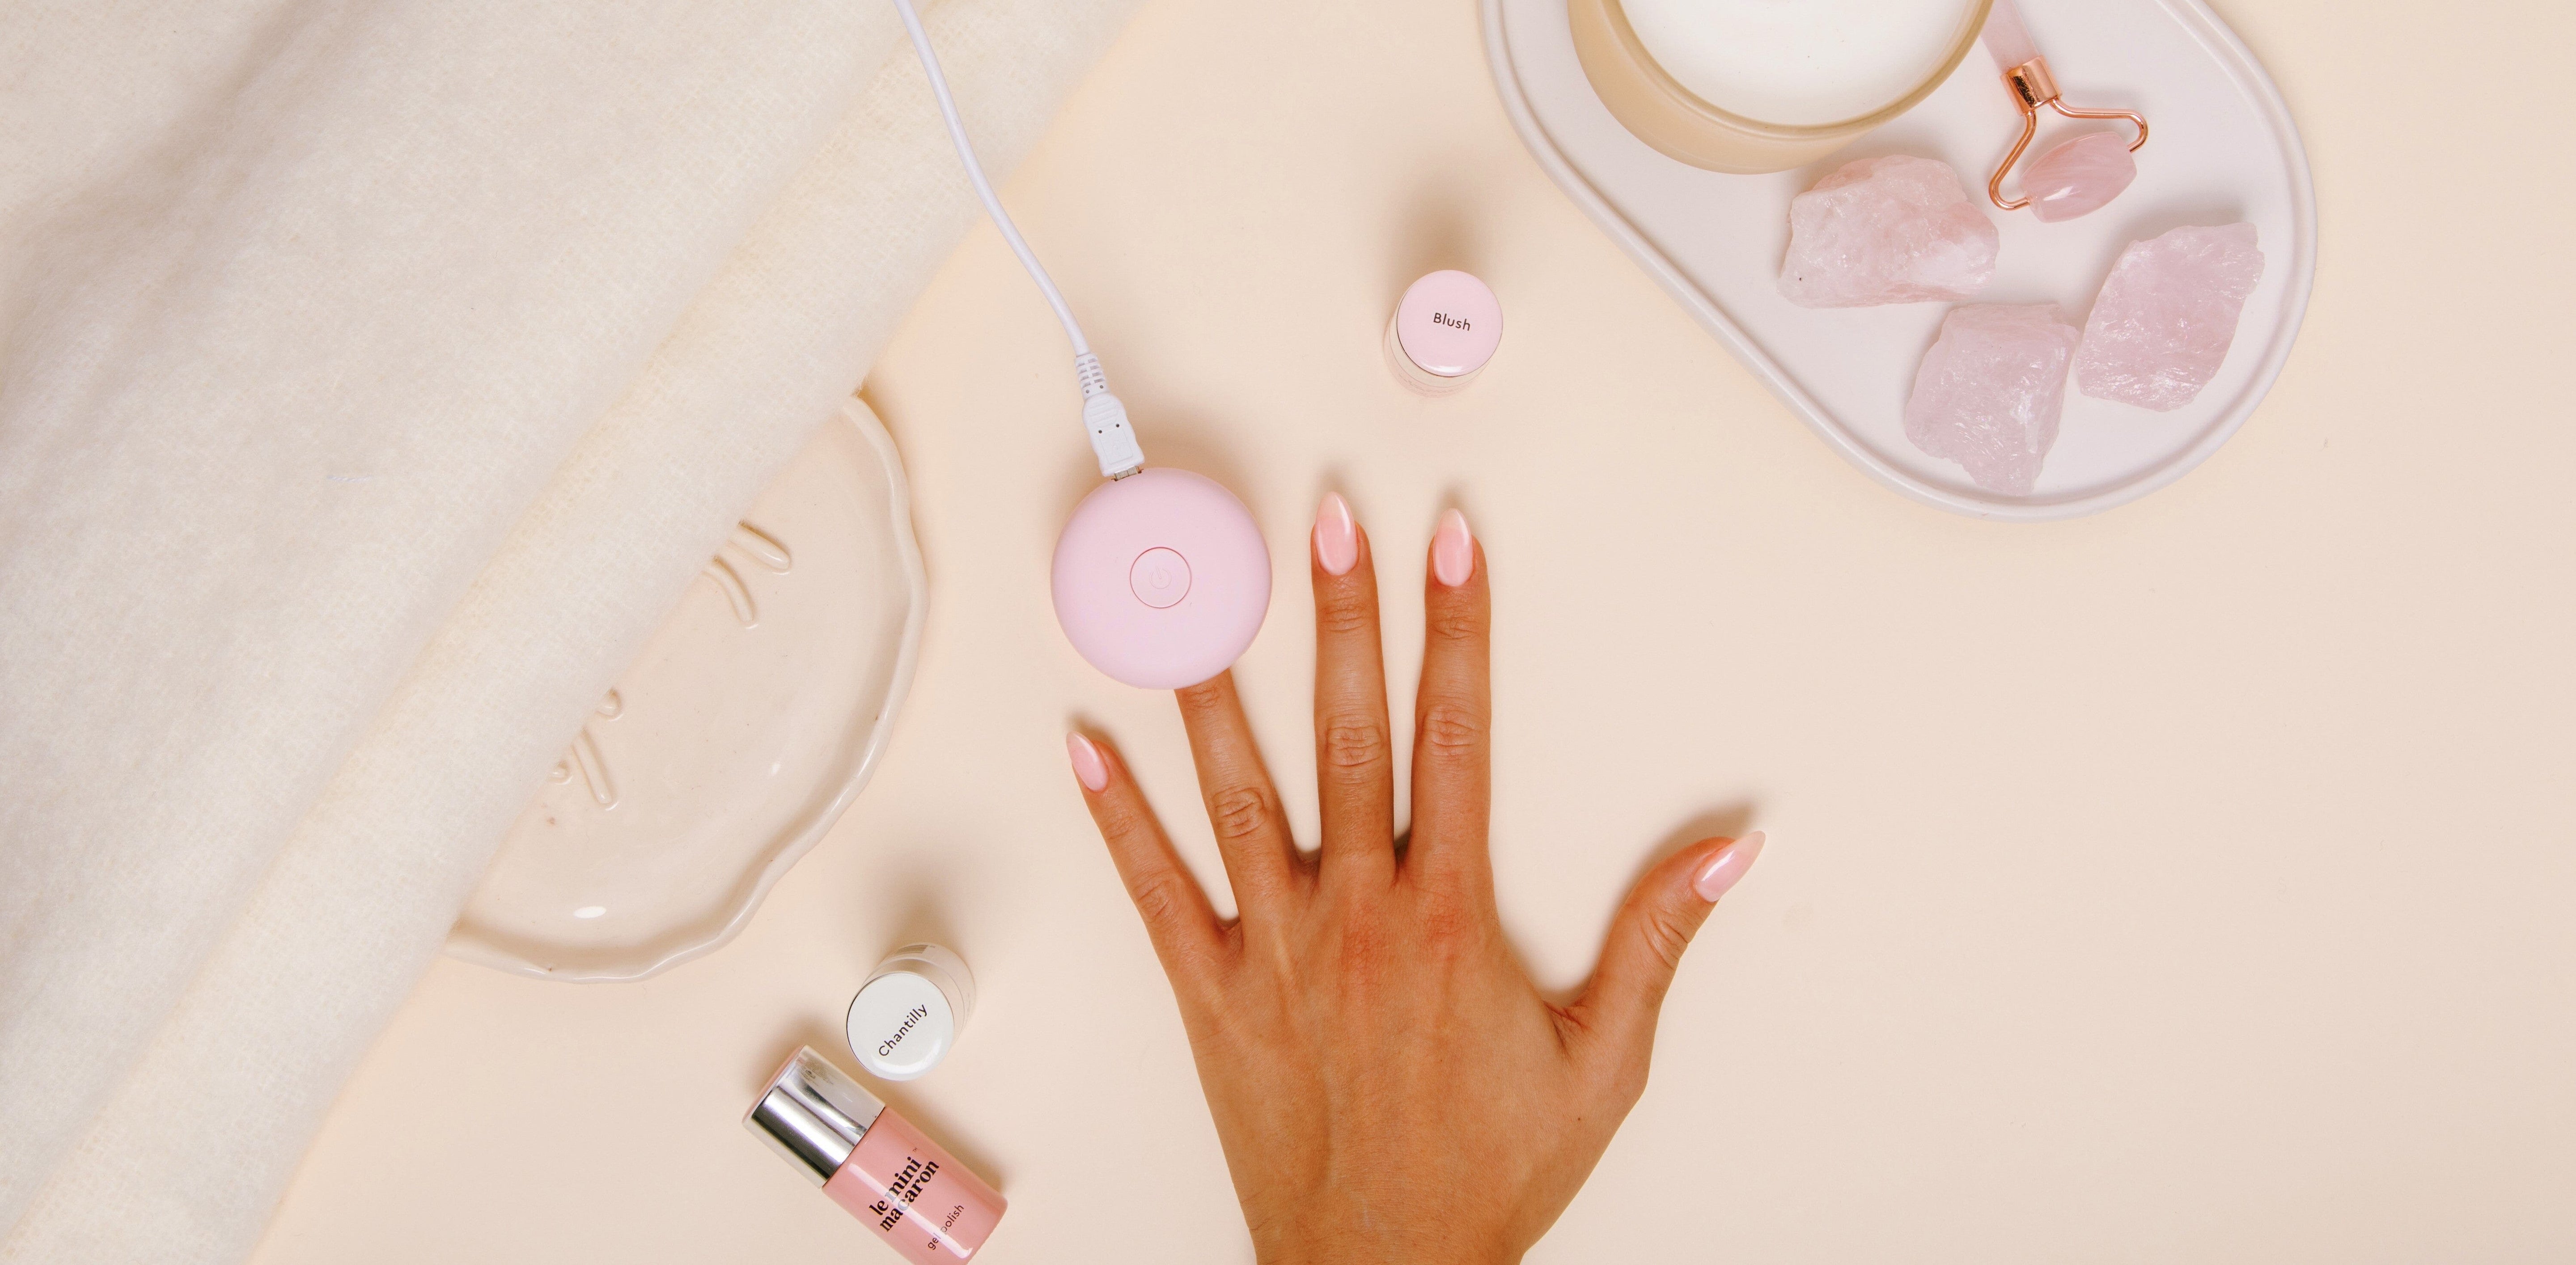 How to do gel nails at home?